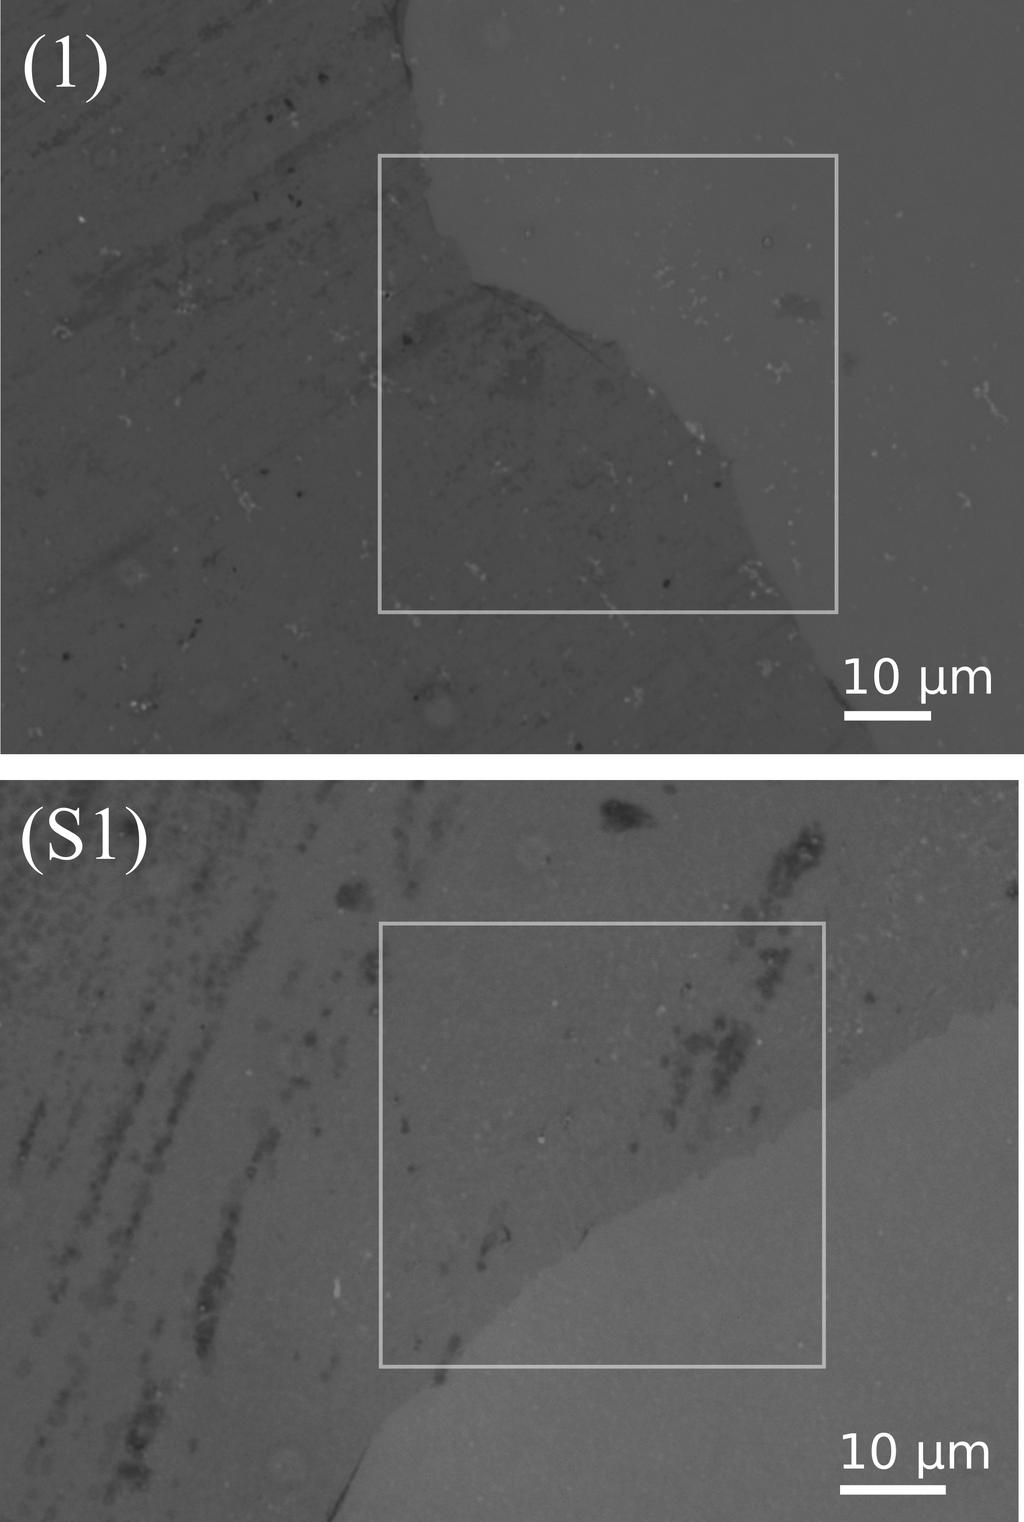 Figure S3 Wider contrast-stretched optical micrographs of the regions of CVD graphene shown in in Figure 1(a) and Figure S1(a), under